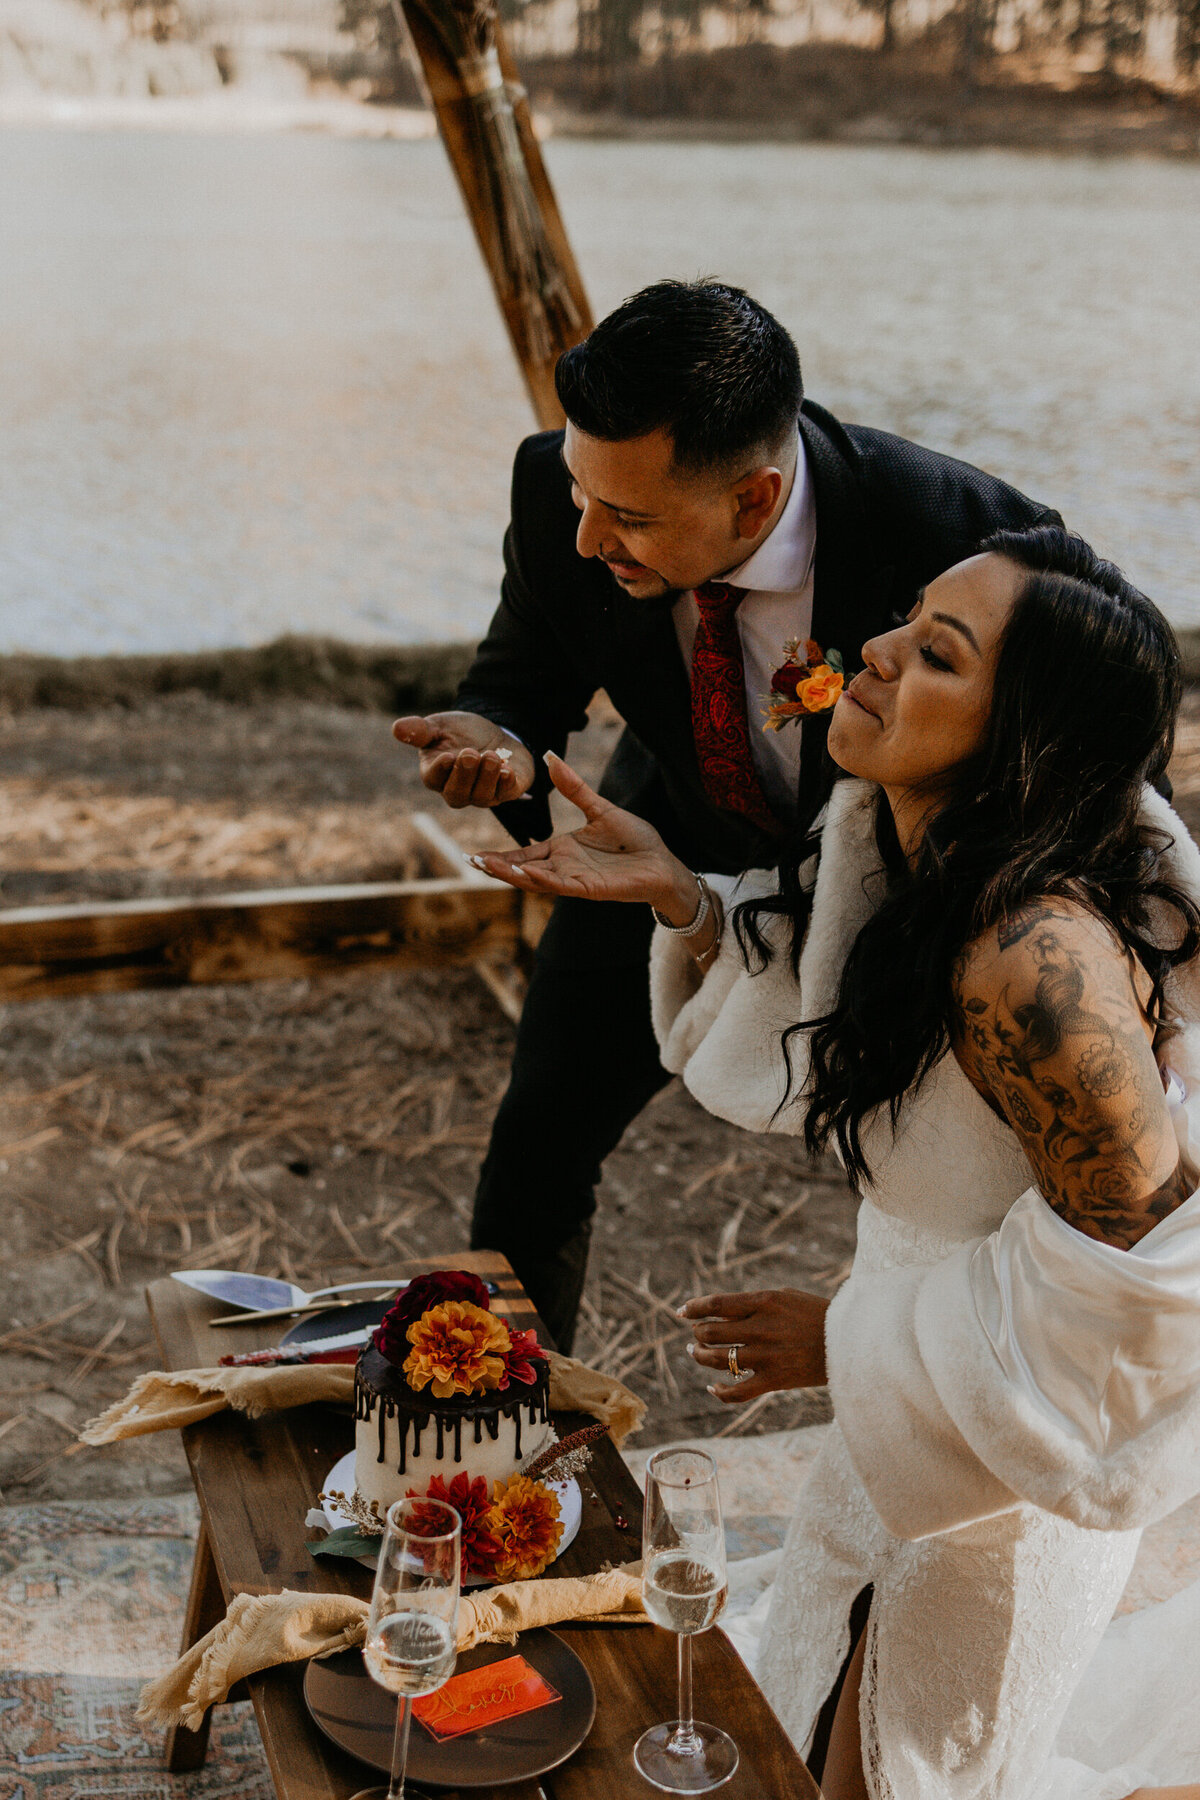 newlyweds cutting cake after their elopement ceremony